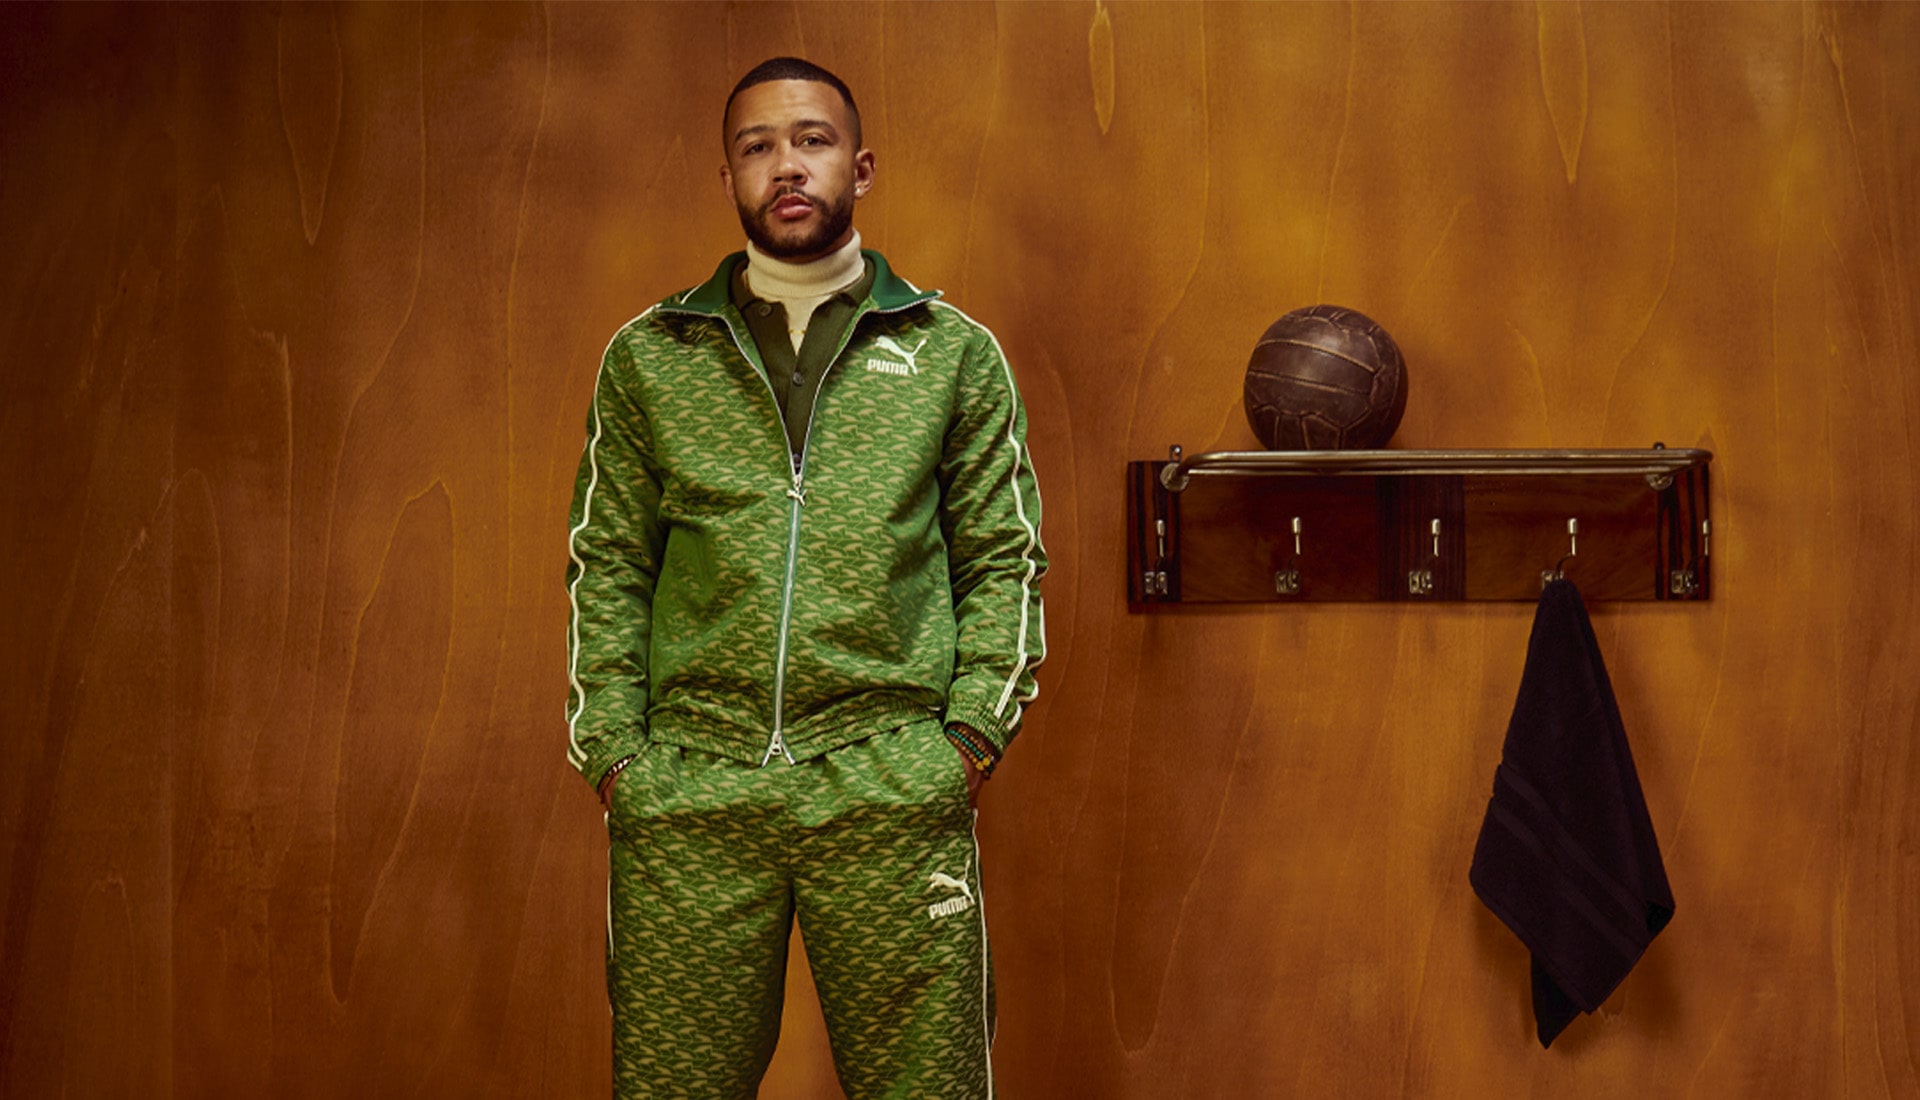 Memphis Depay on X: You love to go to fashion shows, but we bring